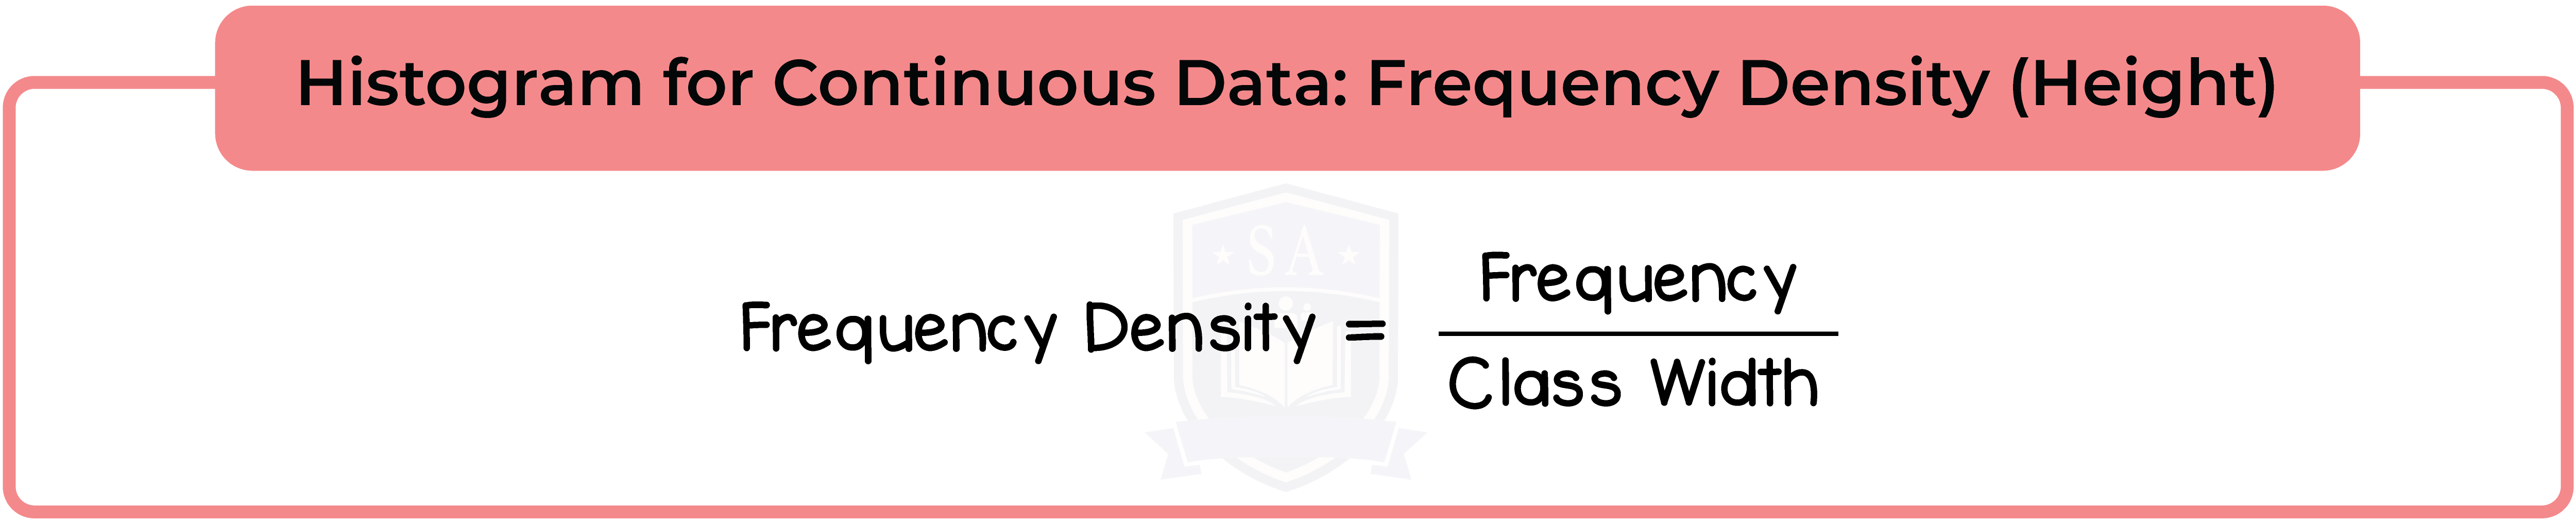 edexcel_igcse_mathematics a_topic 38_graphical representation of data_001_Histogram for Continuous Data: Frequency Density (Height)